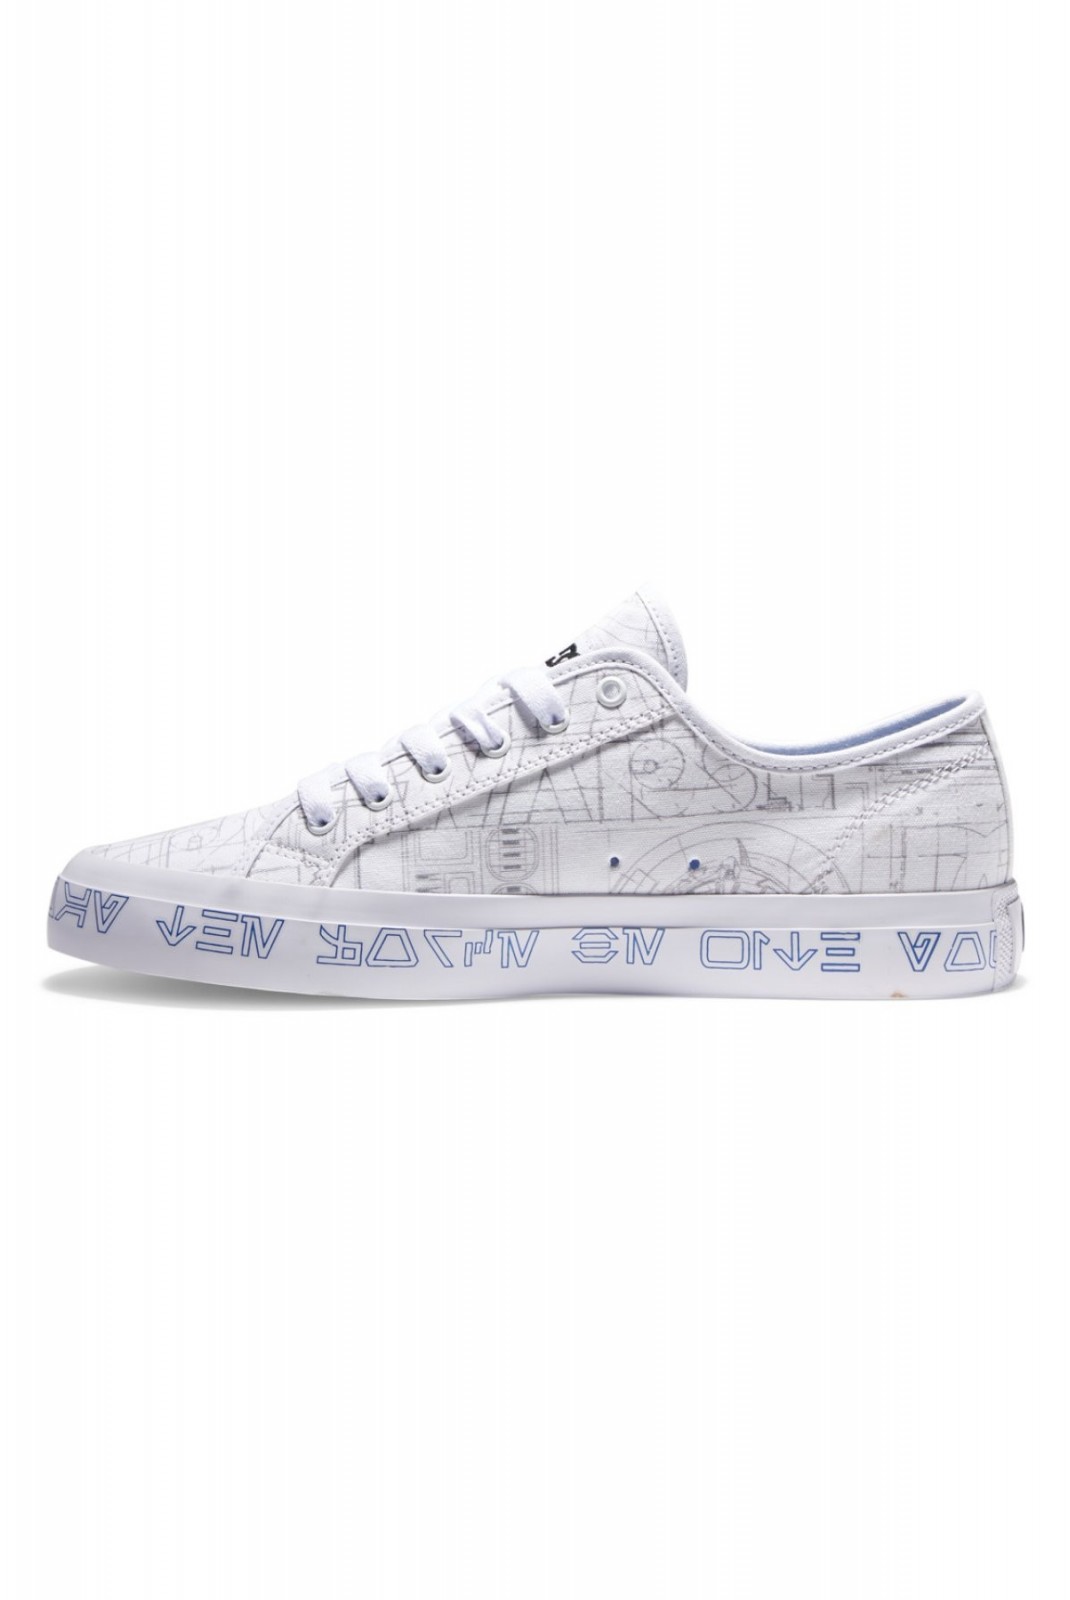 Sneakers toile Star Wars Manual Dc shoes WBL ADYS300718